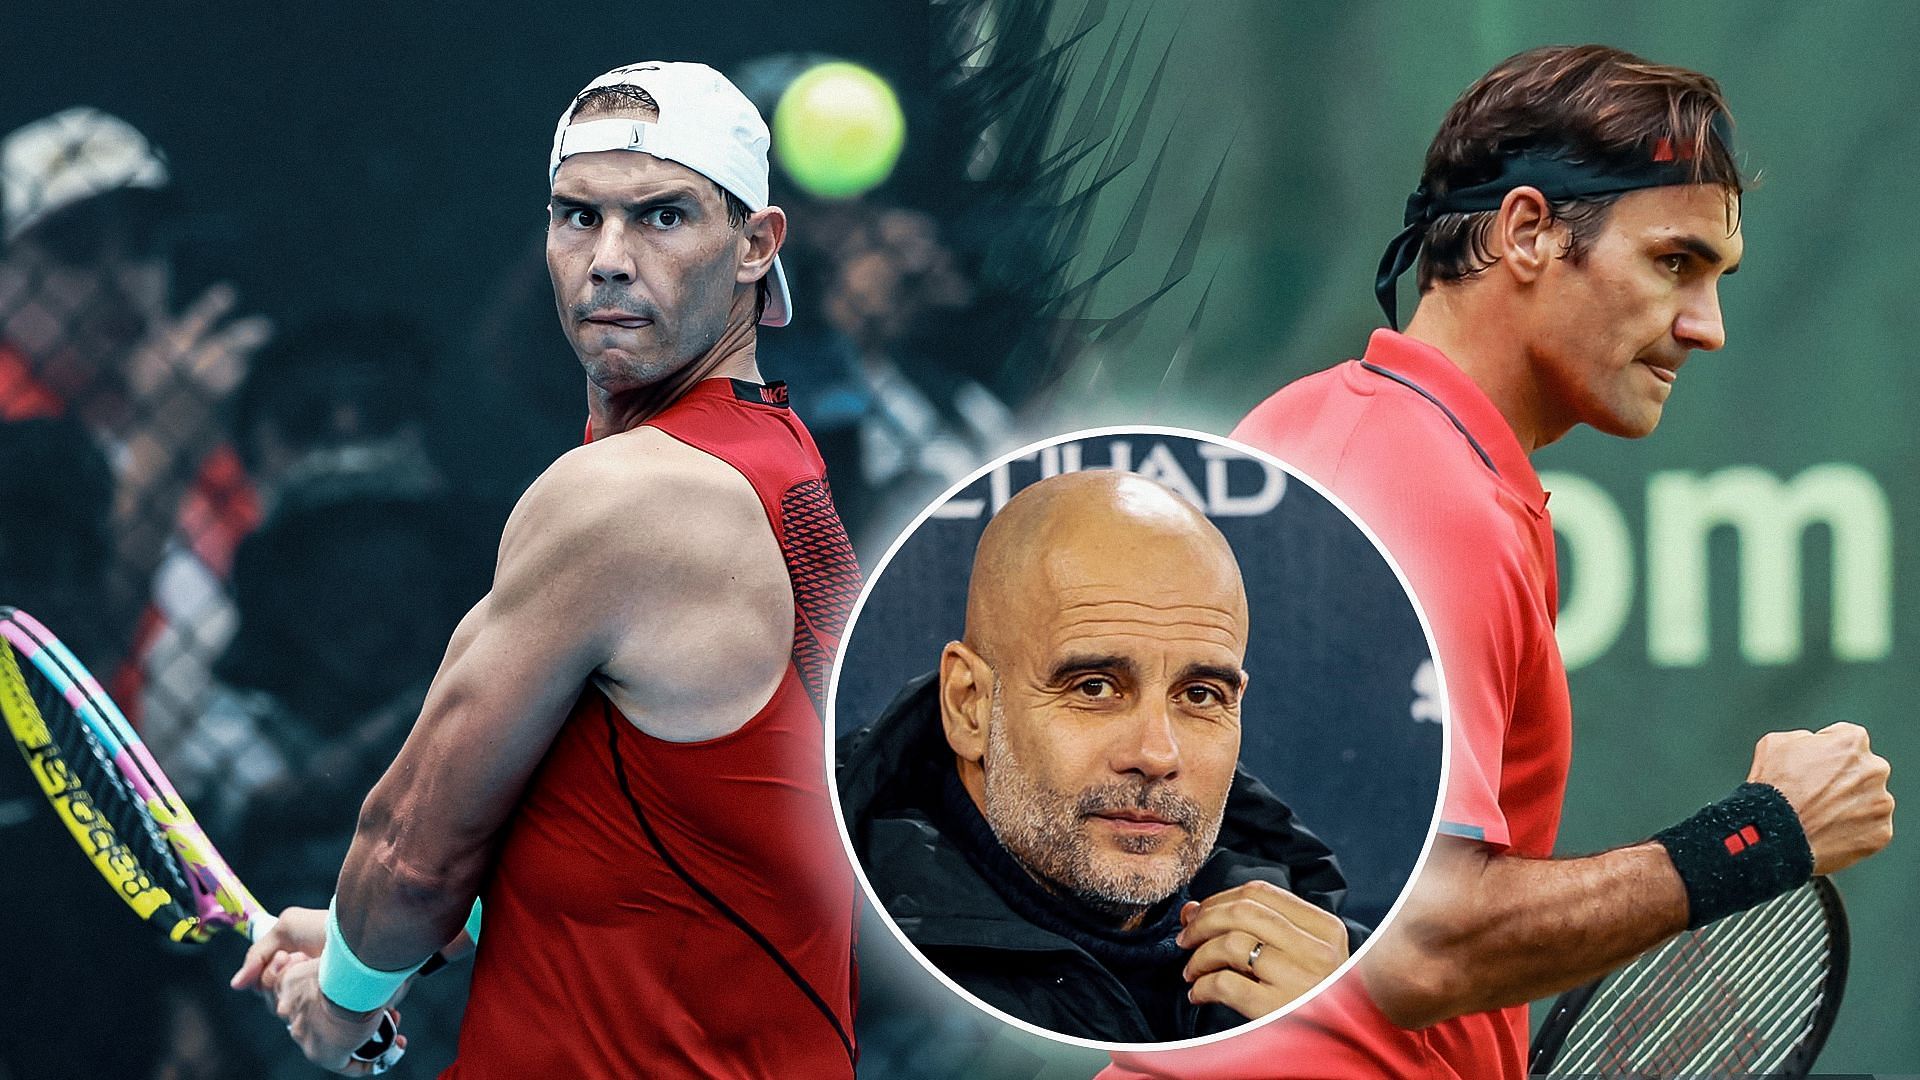 Pep Guardiola has stated that Rafael Nadal and Roger Federer inspire him.